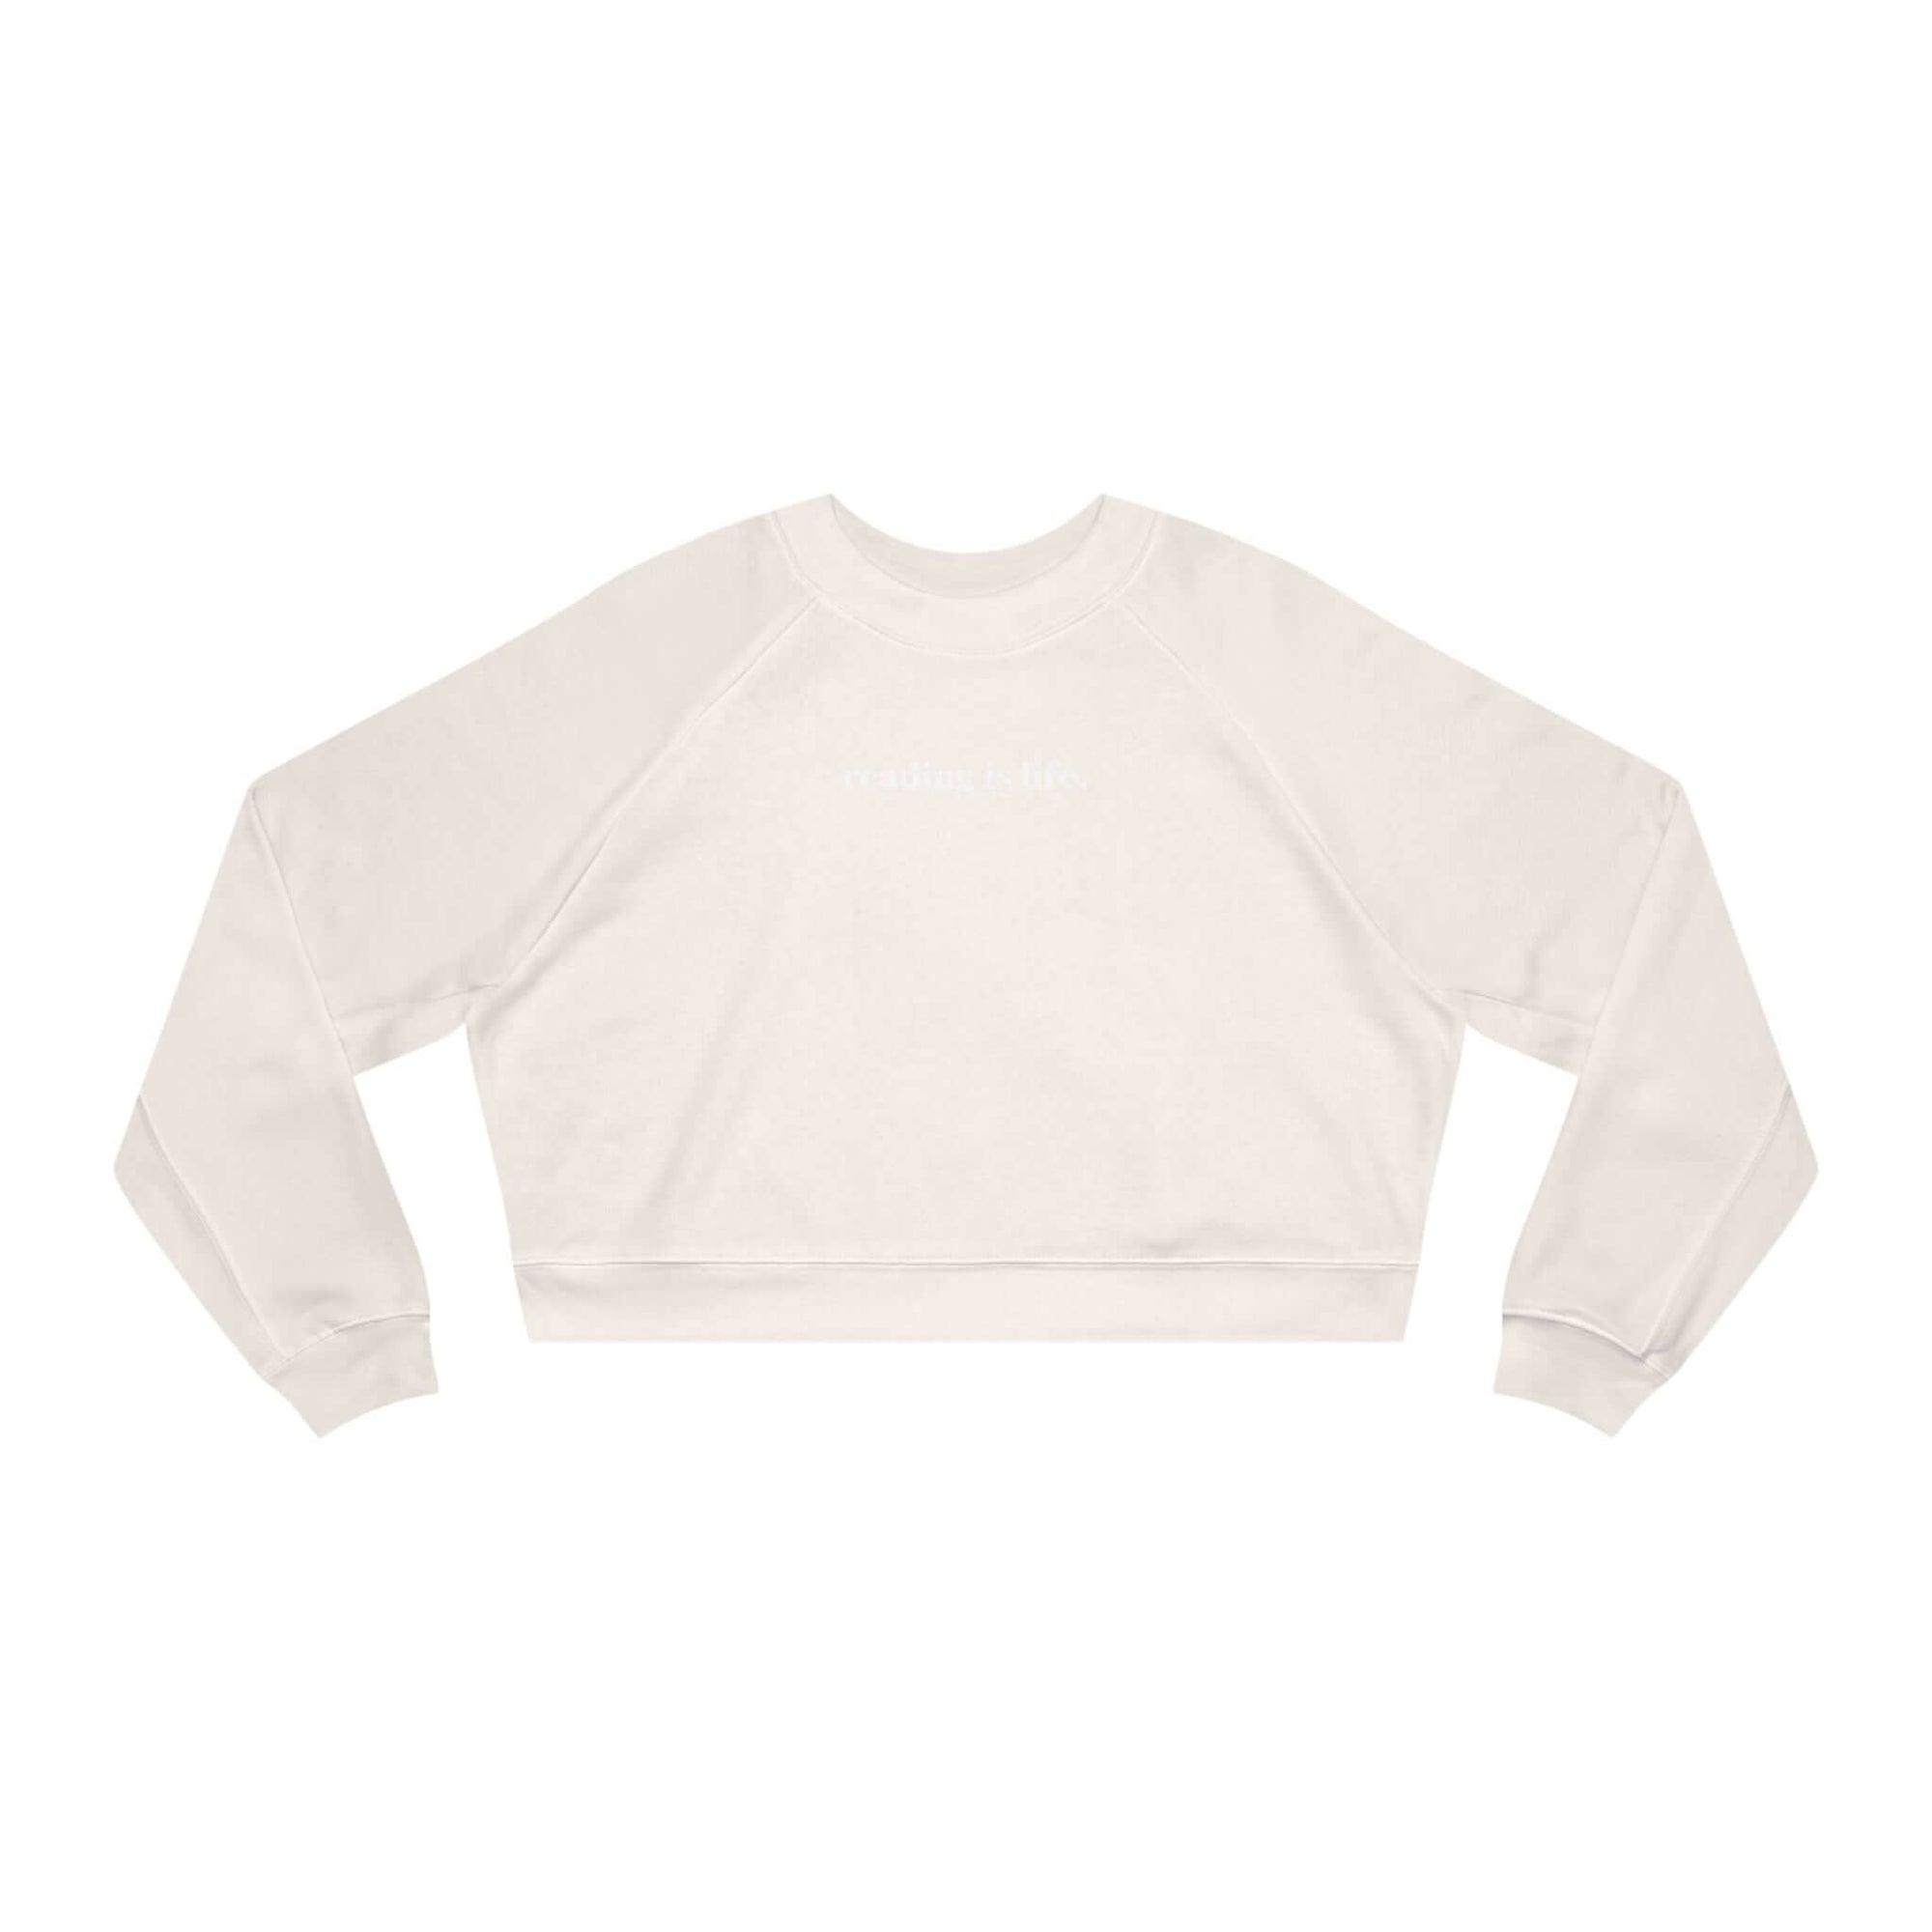 Reading Is Life Cropped Pullover (White Text)